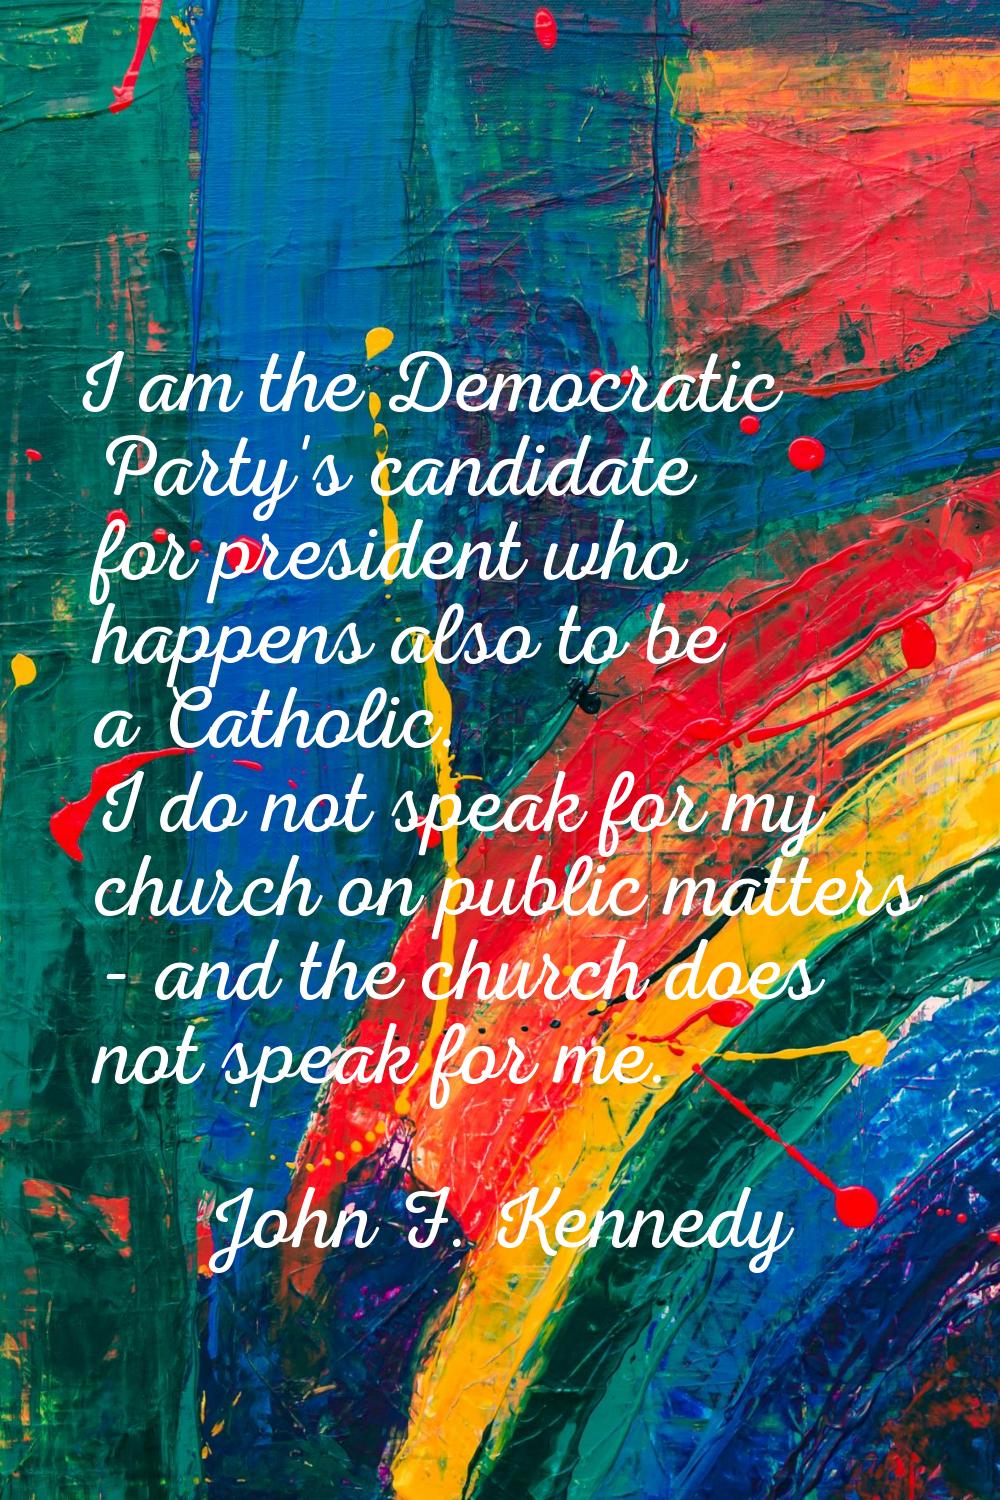 I am the Democratic Party's candidate for president who happens also to be a Catholic. I do not spe